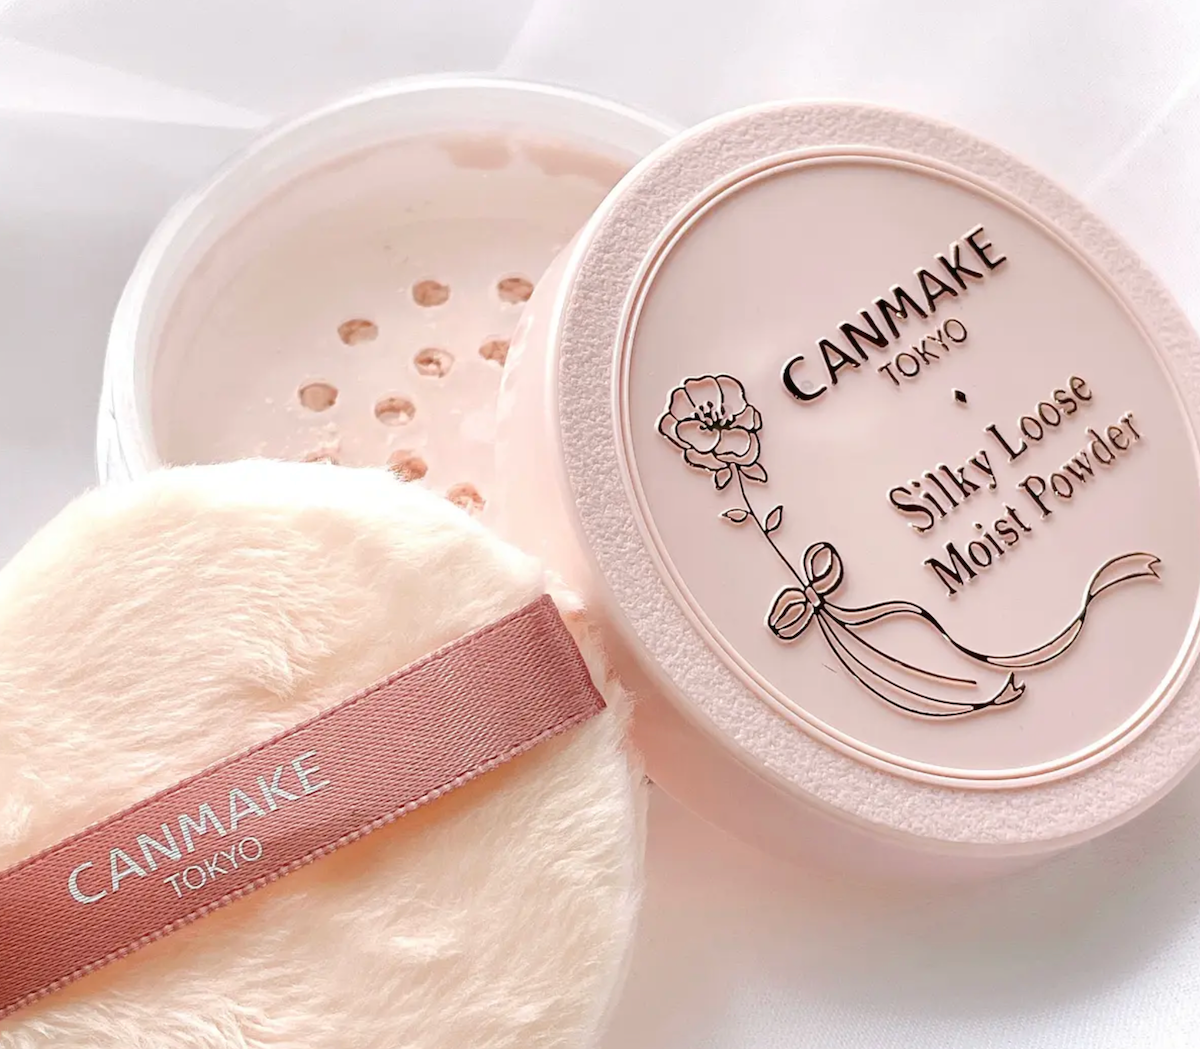 Compare the popular colors of Canmake Silky Loose Moist Powder CLose uｐ looks